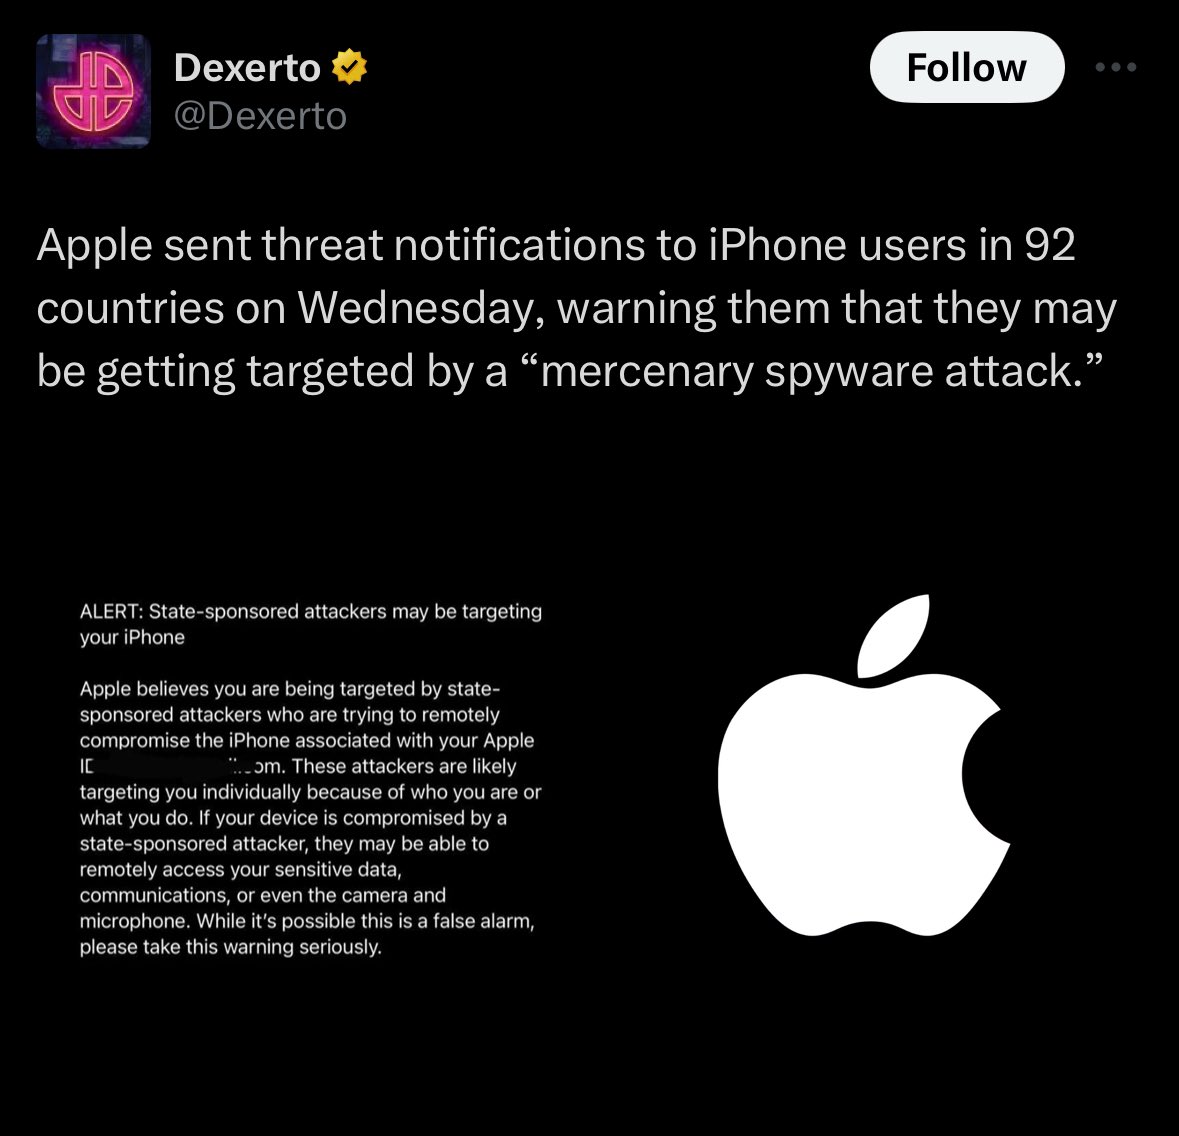 Damn! The sophistication of state-sponsored attacks is increasing day by day, with the use of #Spyware like #MercenarySpyware targeting #Apple devices and compromising their users' #Privacy and #Security
#iPhone #StateSponsored #Hack